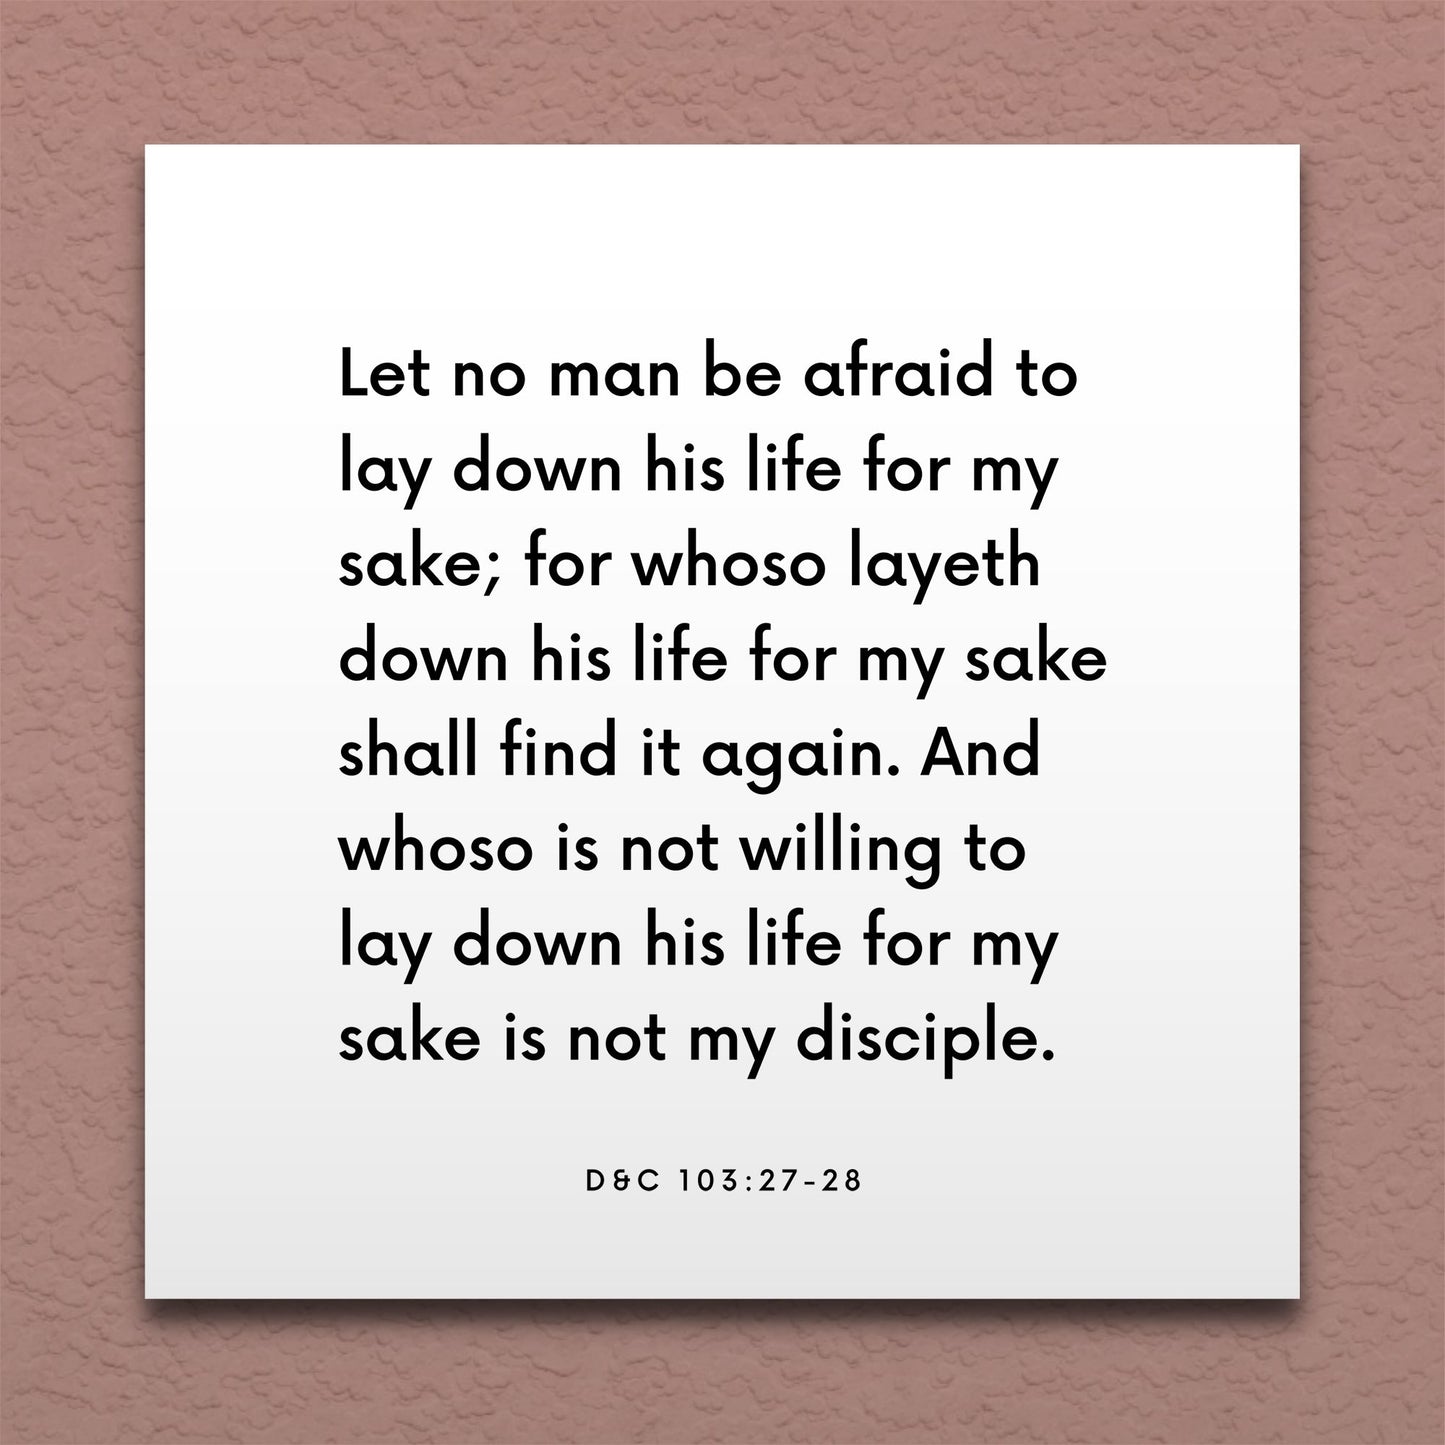 Wall-mounted scripture tile for D&C 103:27-28 - "Whoso layeth down his life for my sake shall find it again"